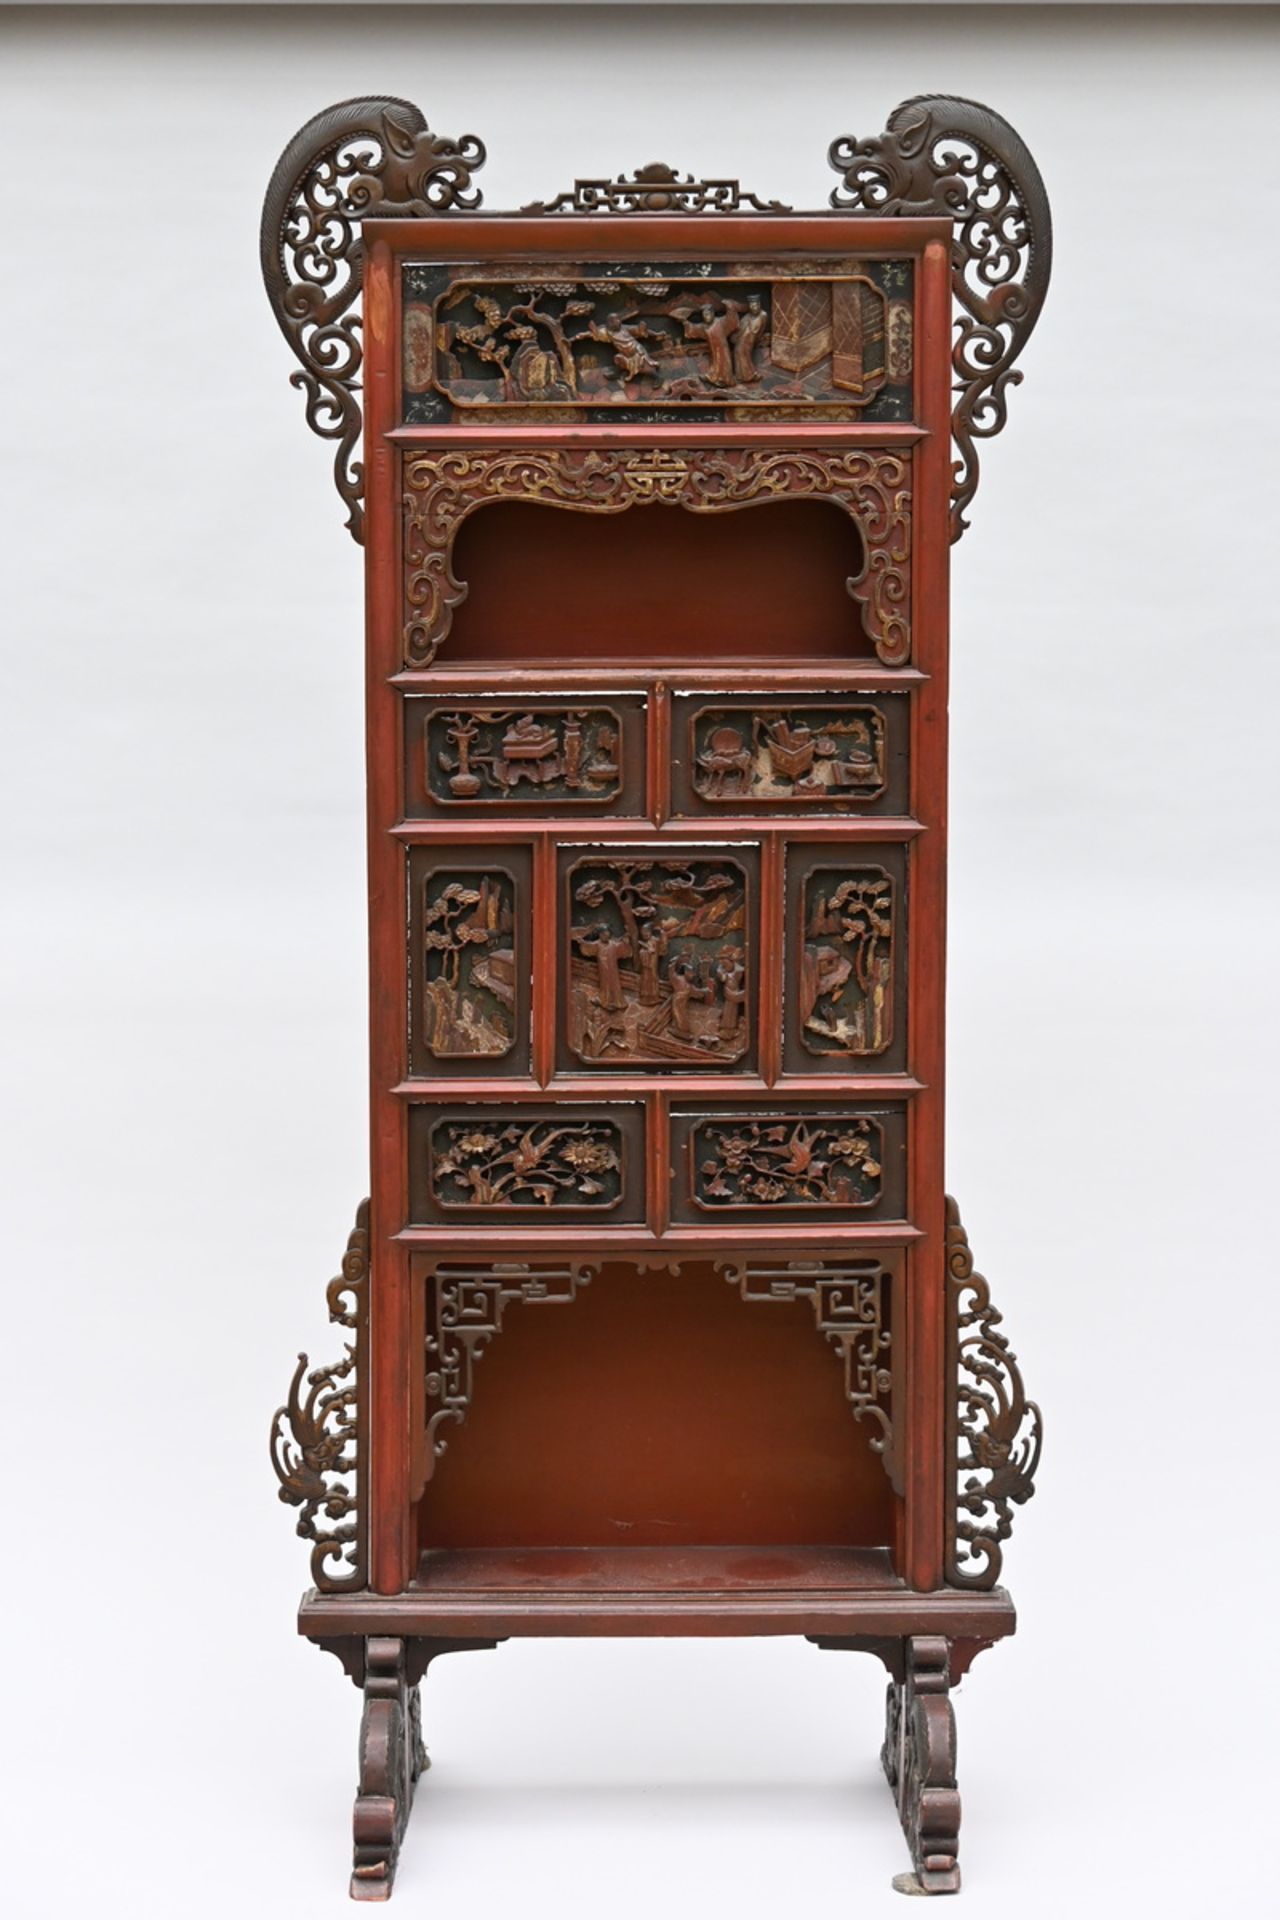 Decorative screen in red lacquer, China (135x60cm)